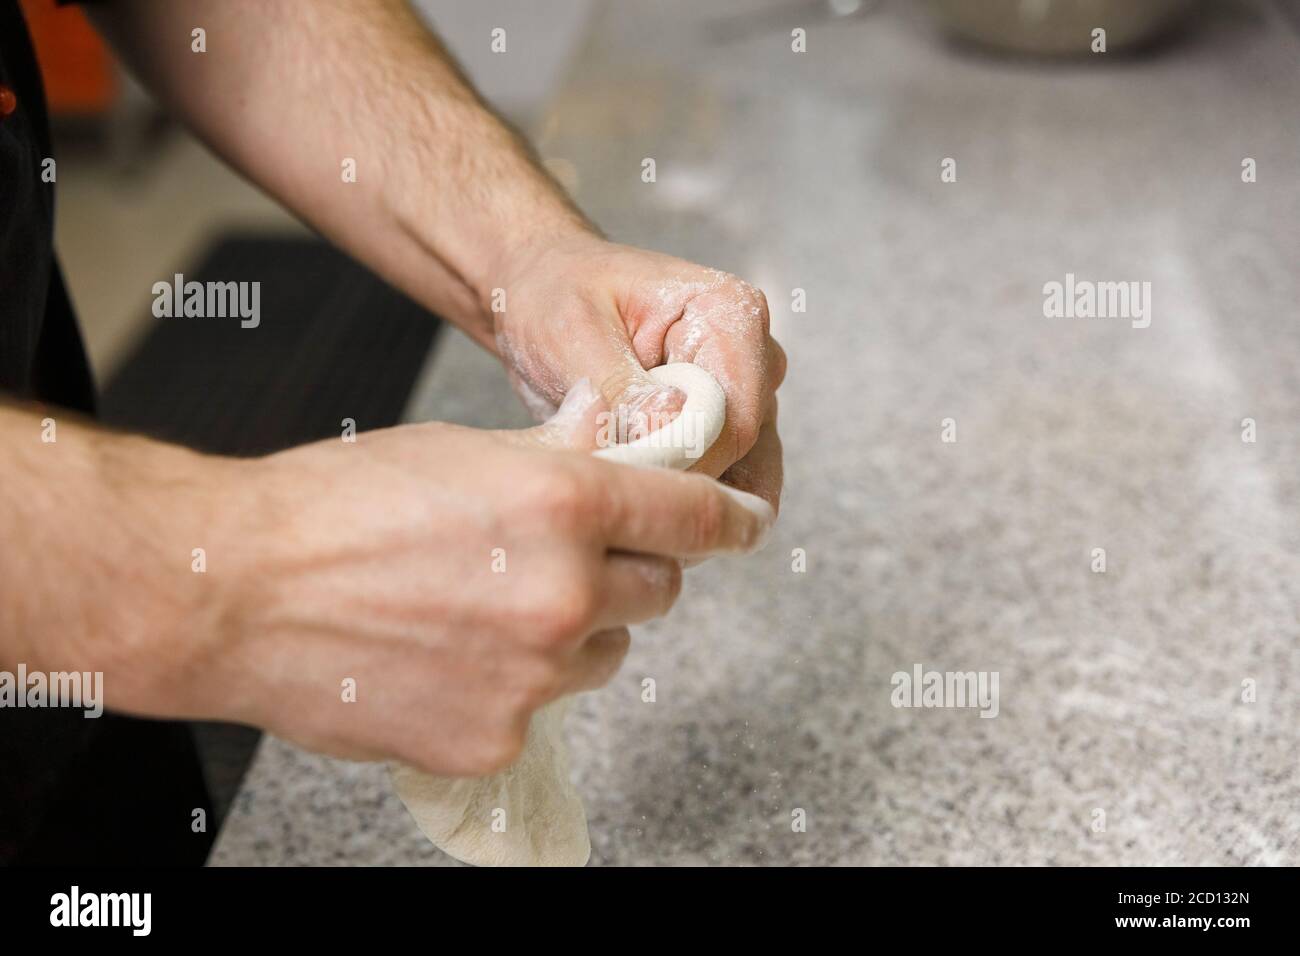 Making dough by male hands on table background.  Pizza maker prepares a pizza dough. Stock Photo